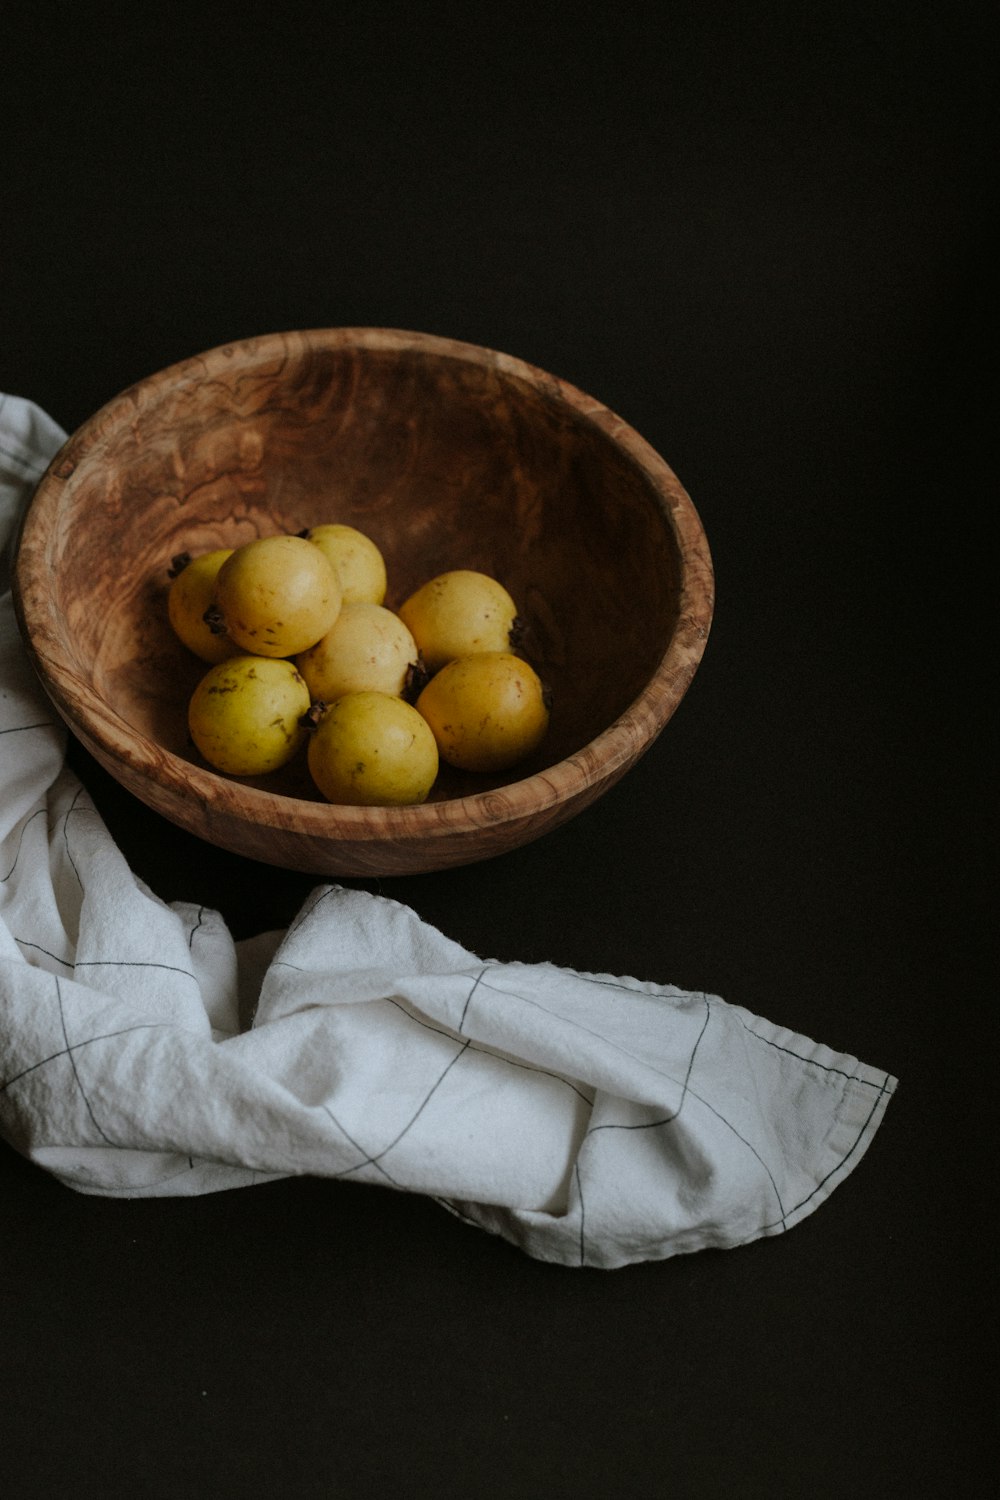 yellow round fruits on brown wooden bowl